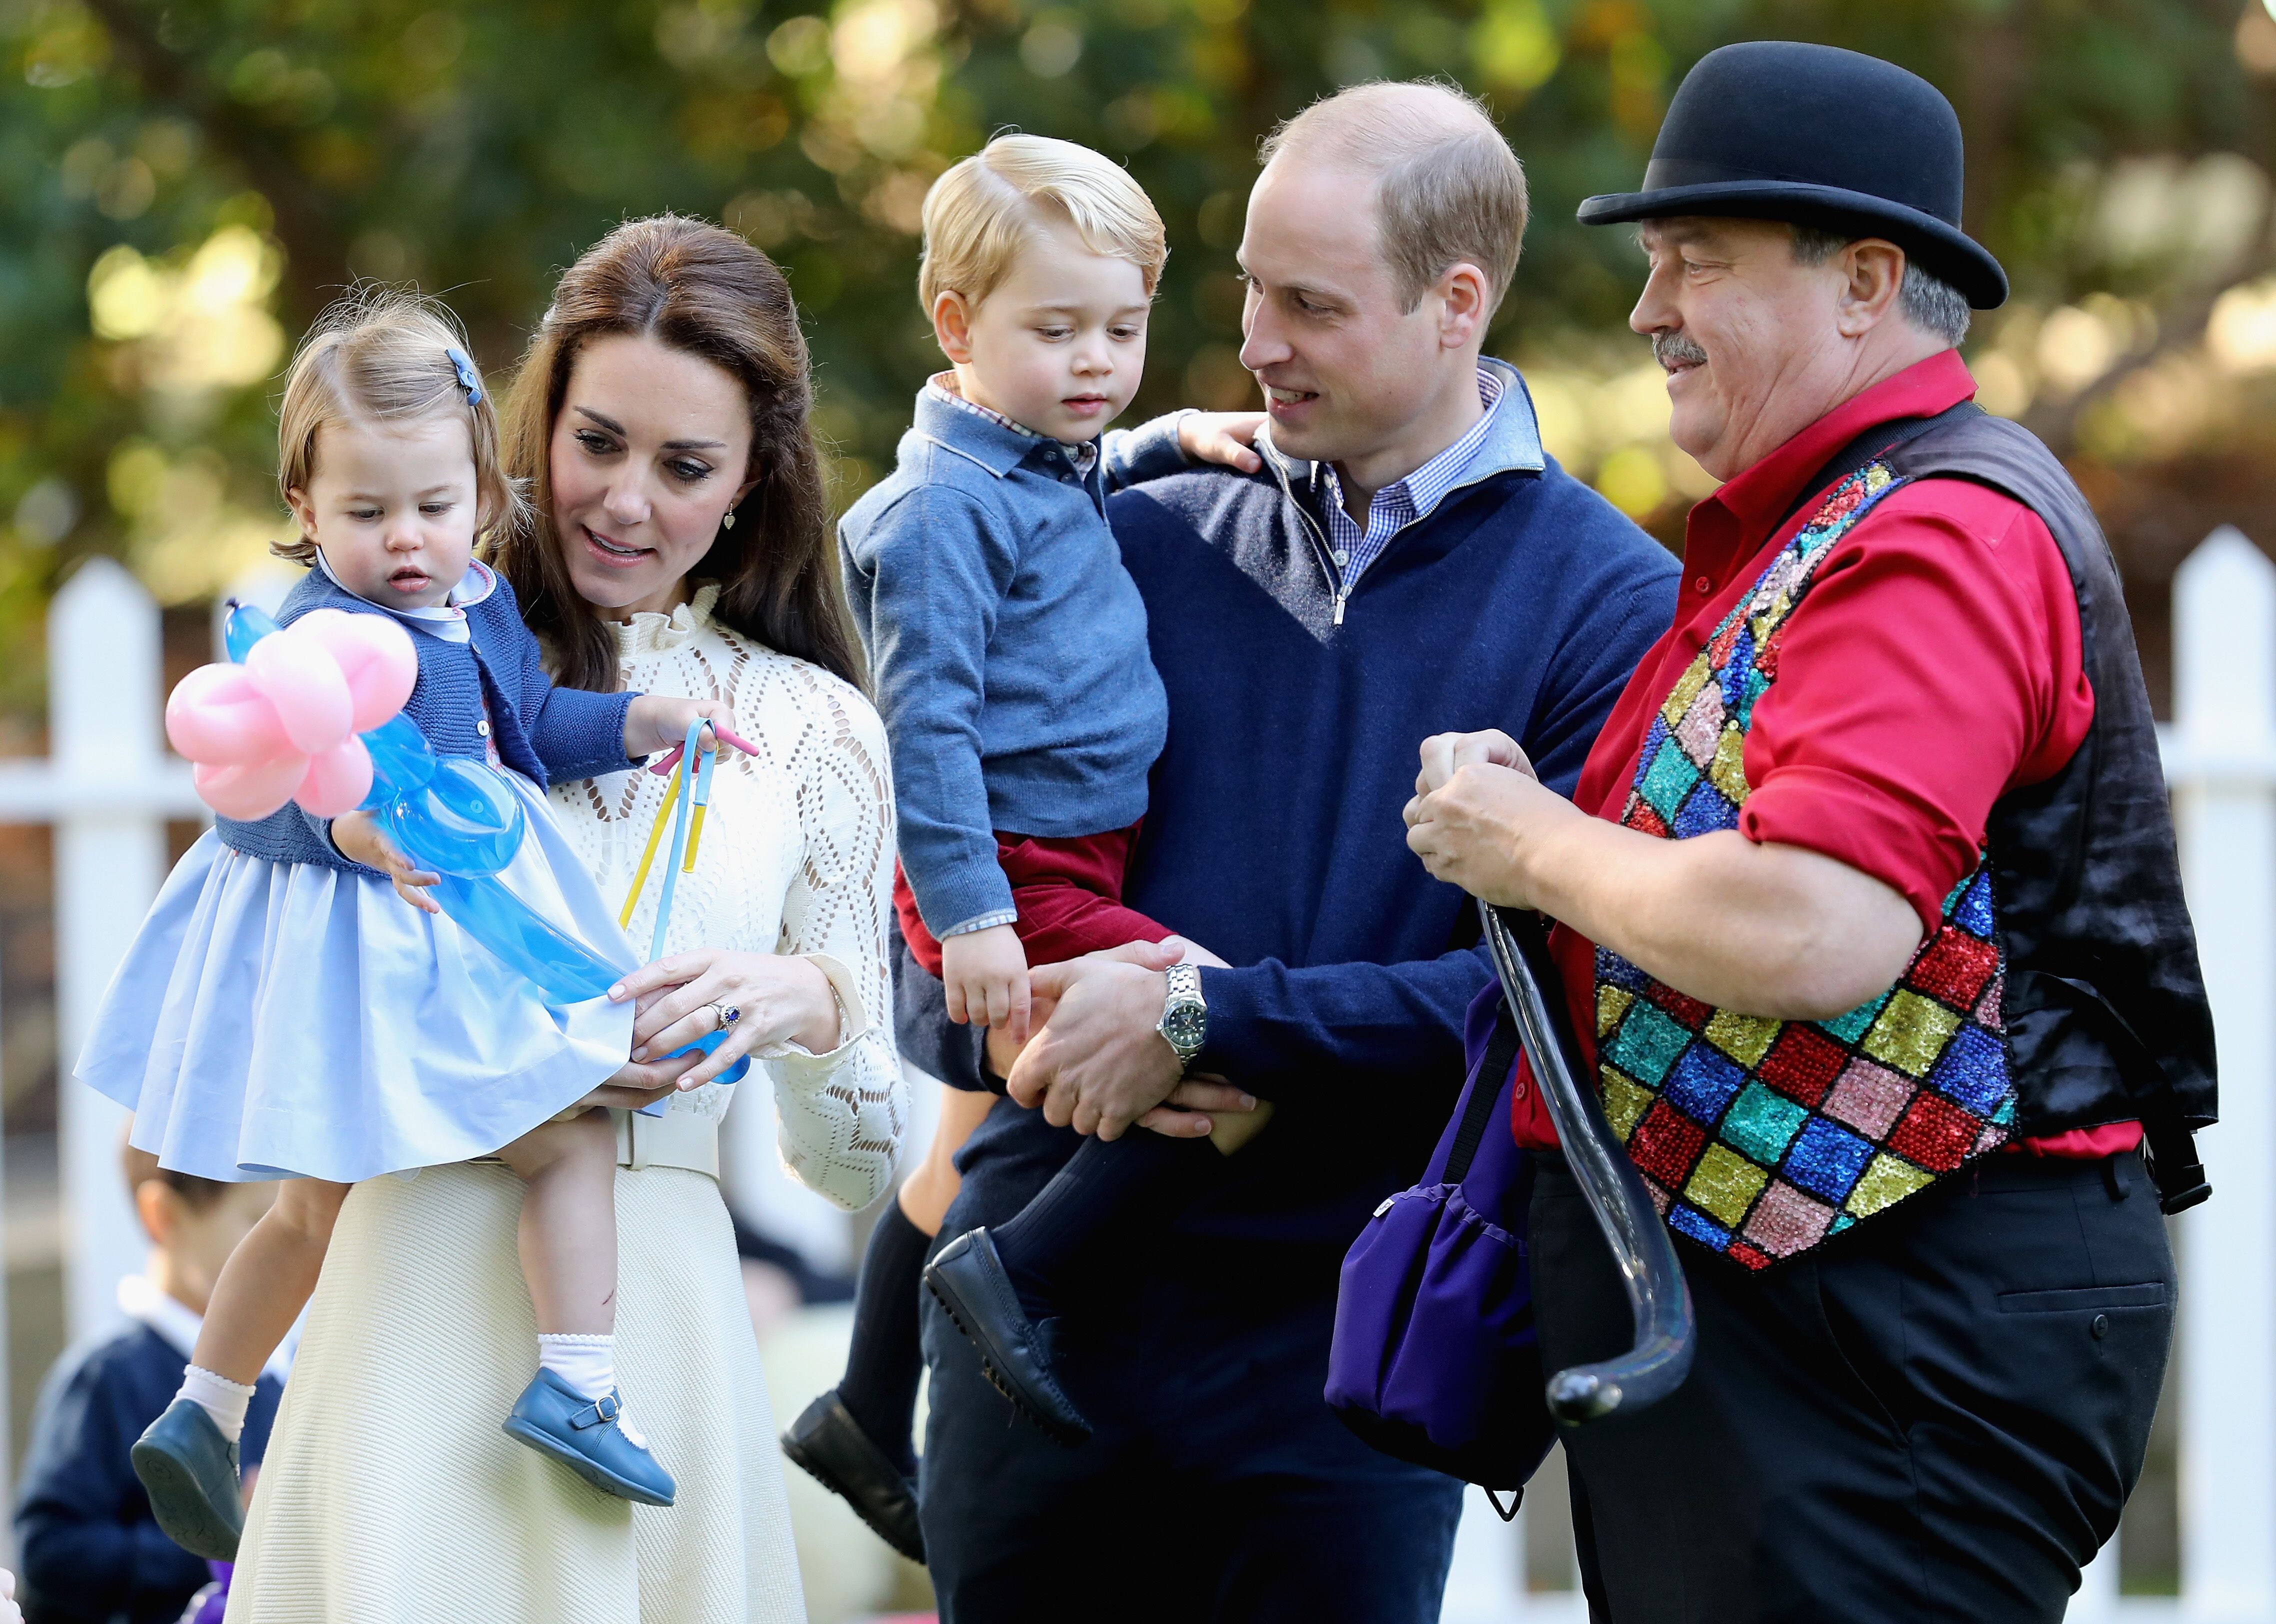 Duchess of Cambridge holding Princess Charlotte of Cambridge and Prince George of Cambridge, being held by Prince William, Duke of Cambridge at a children's party for Military families during the Royal Tour of Canada on September 29, 2016 in Victoria, Canada | Photo: Getty Images